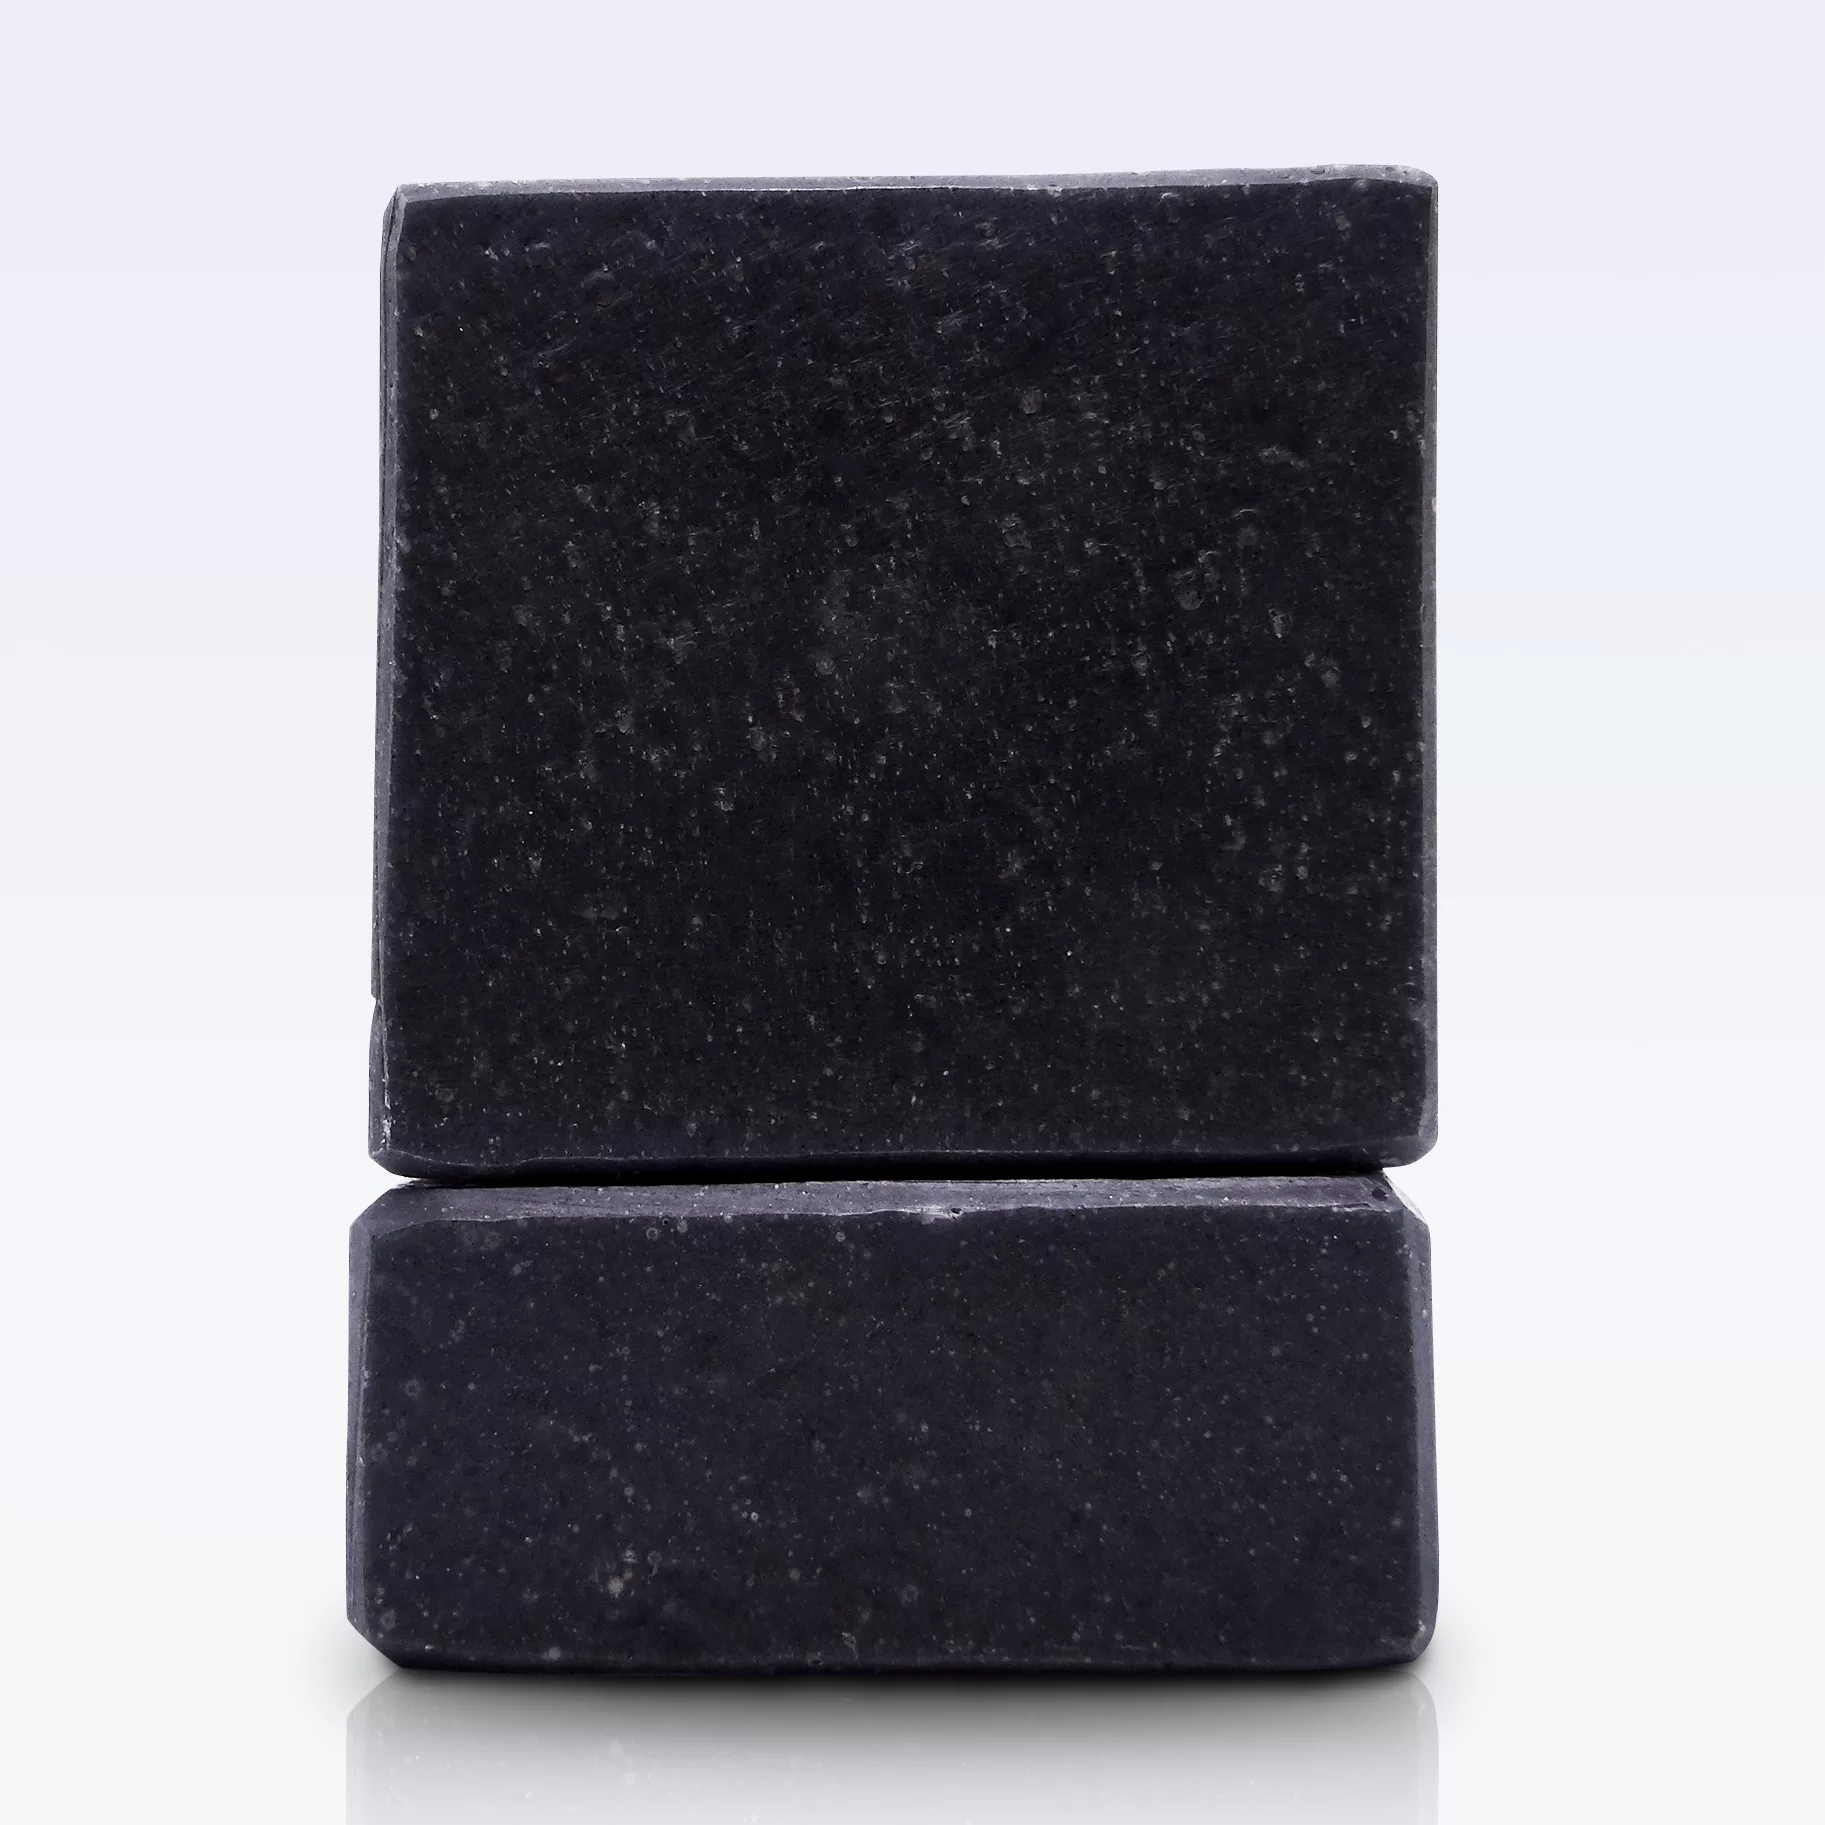 Charcoal Facial soap by Tubby Tabby Soaps (handmade, unscented, all natural with activated charcoal)